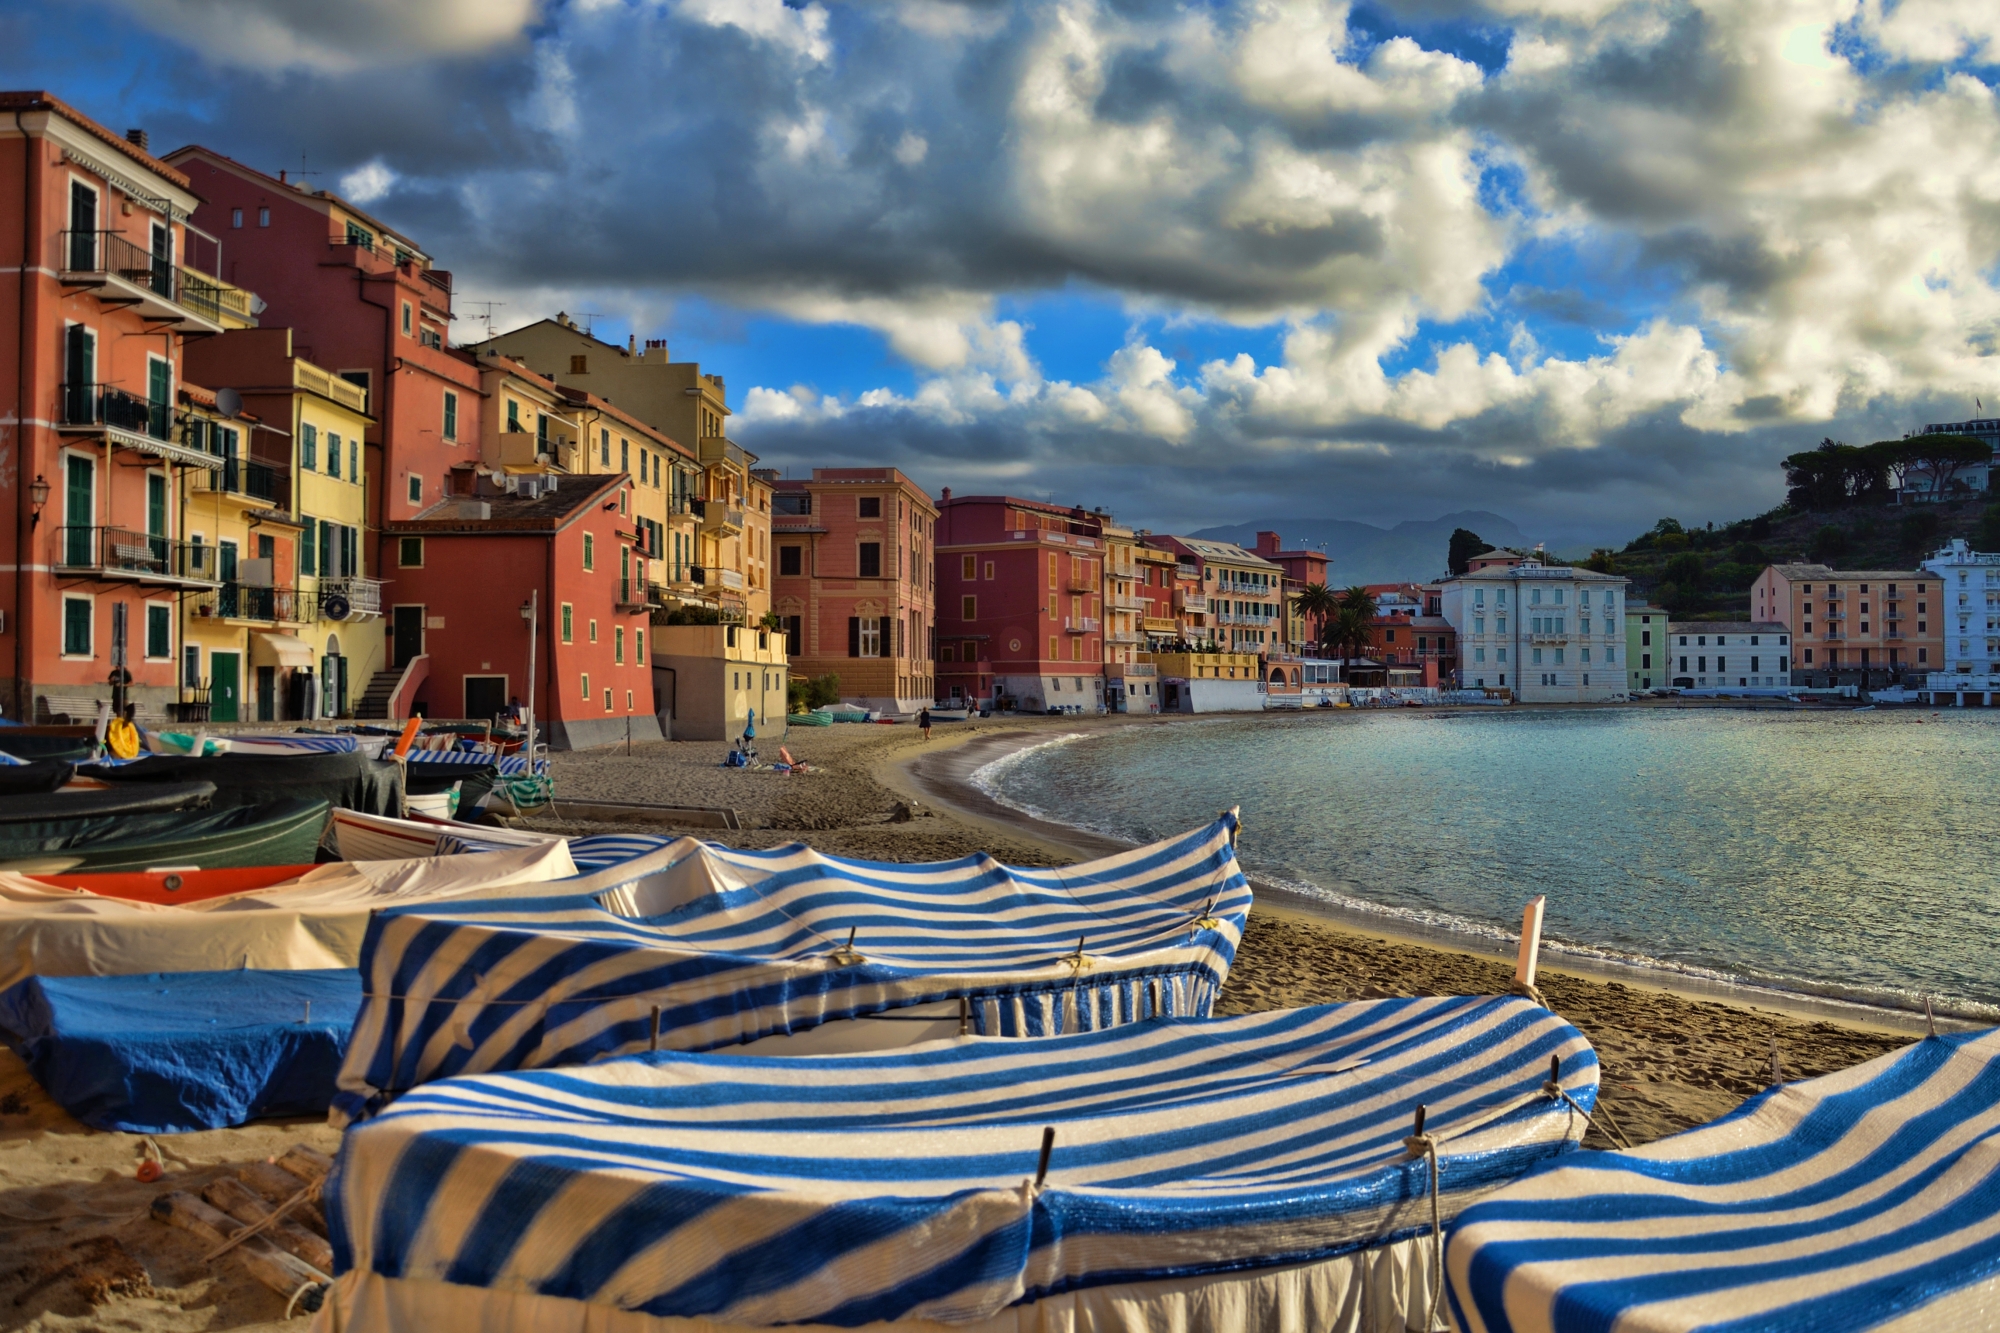 Sestri Levante with boats...